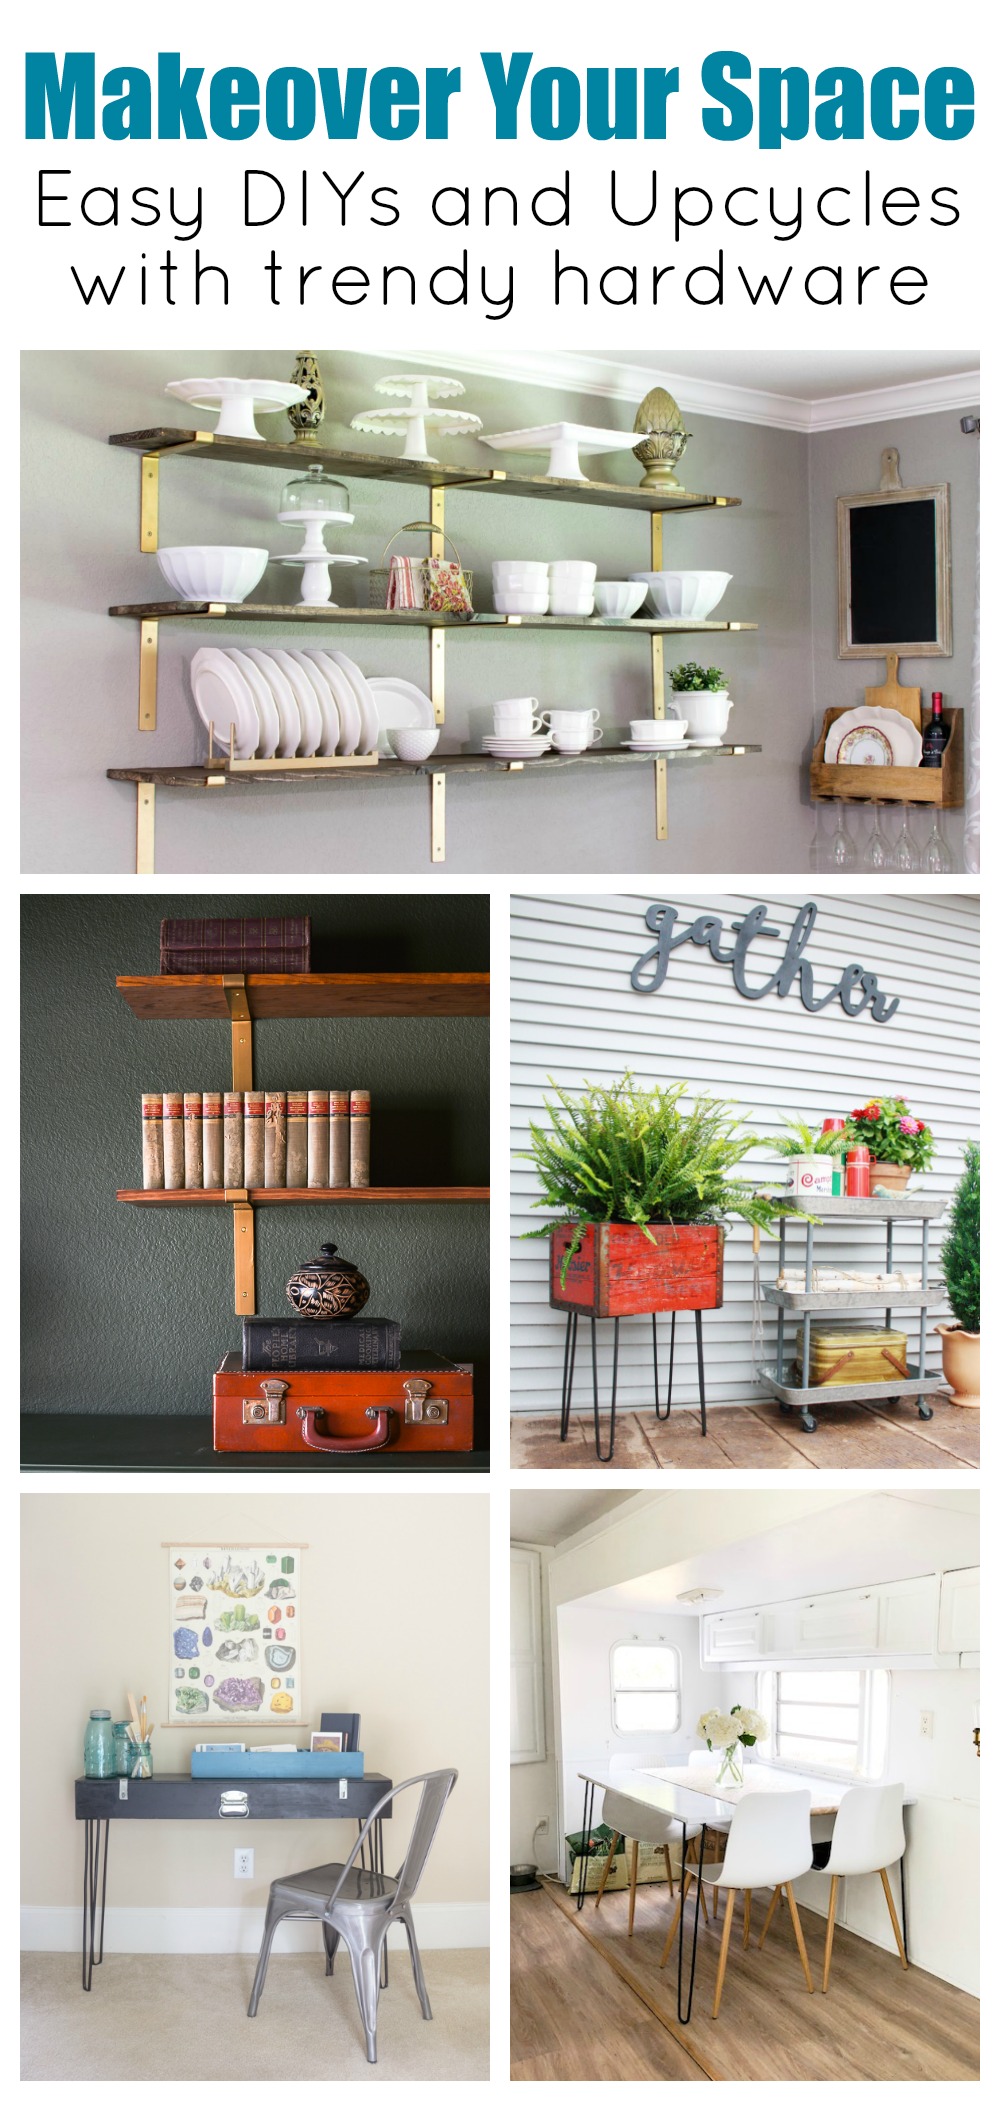 DIYs and Upcycle projects that feature trendy hardware trends like metal brackets and hairpin legs